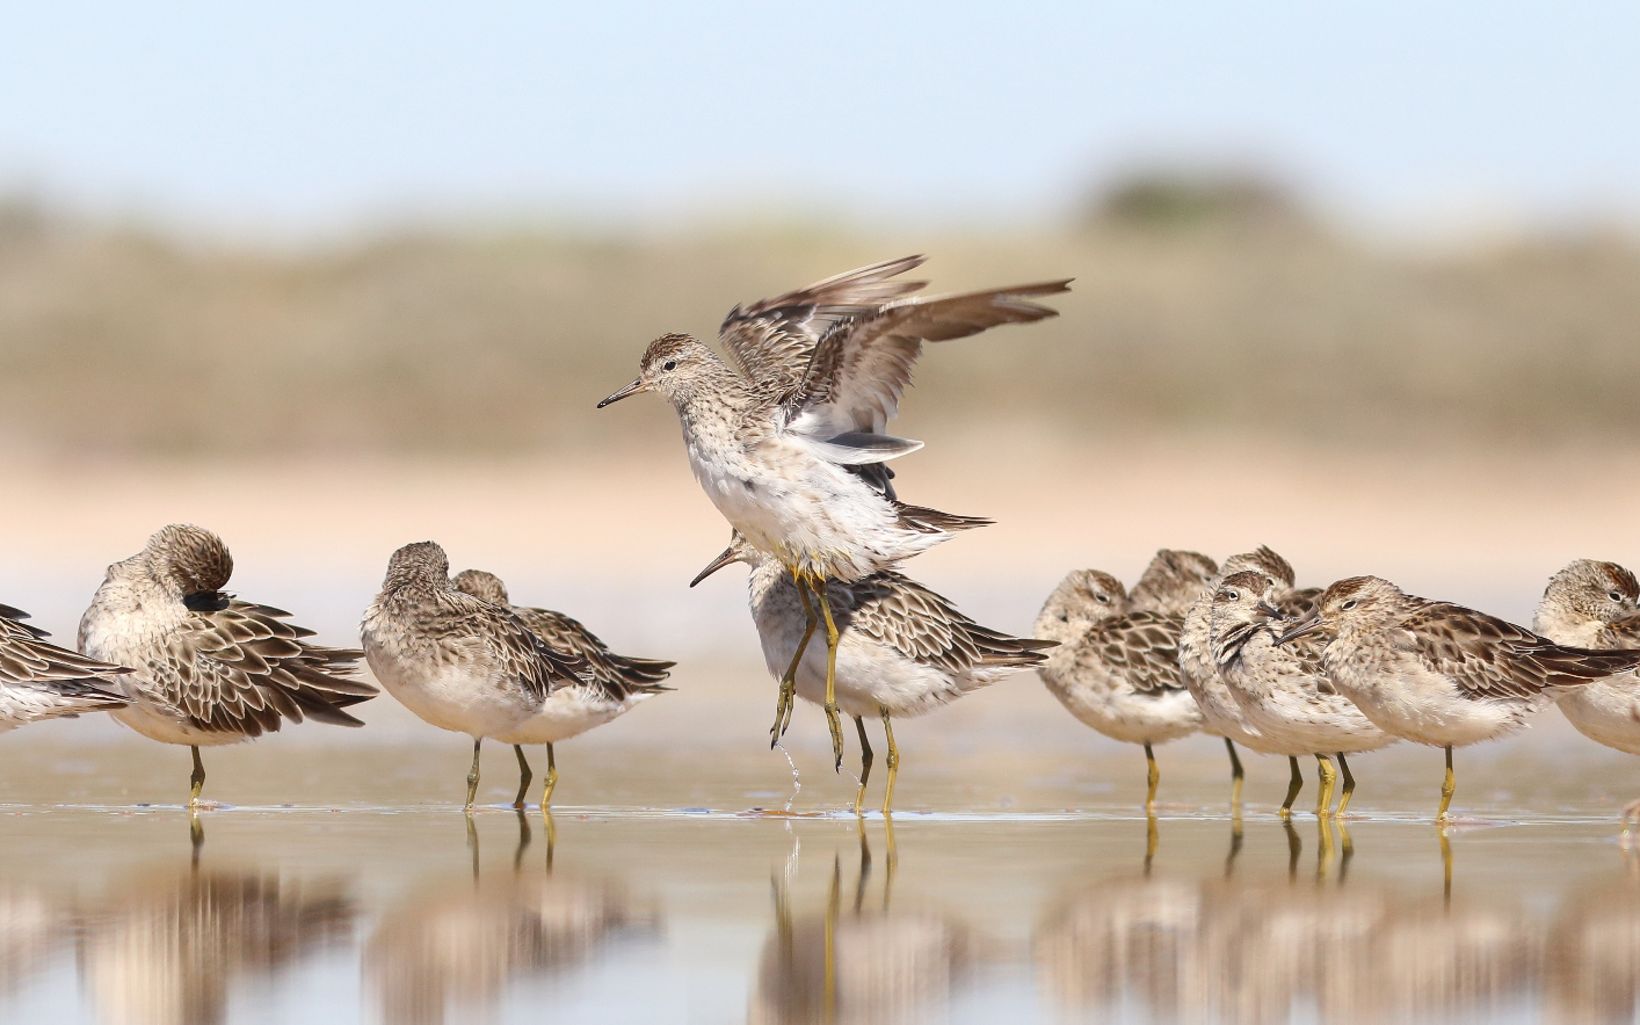 A migratory shorebird arriving in Australia in August, returning to Siberia in March, with greatest numbers in south-eastern Australia.